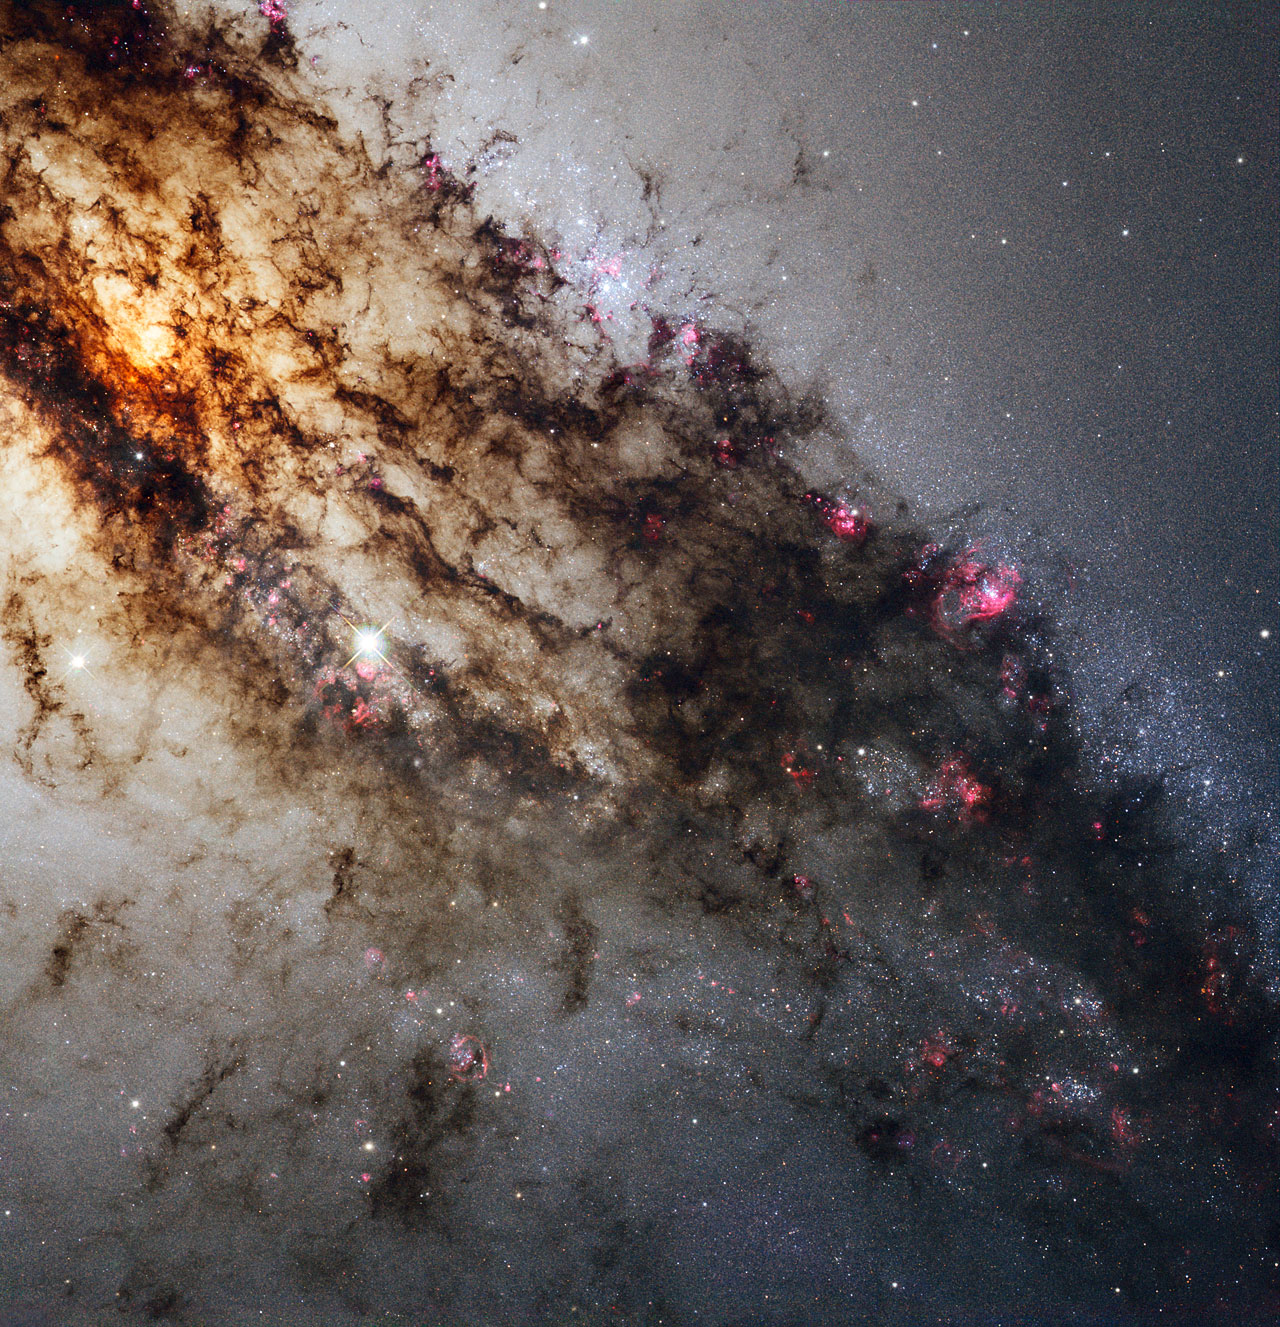 Centaurus A, also known as NGC 5128, is well known for its dramatic dusty lanes of dark material. Hubble’s new observations, using its most advanced instrument, the Wide Field Camera 3, are the most detailed ever made of this galaxy. They have been combined here in a multi-wavelength image which reveals never-before-seen detail in the dusty portion of the galaxy. As well as features in the visible spectrum, this composite shows ultraviolet light, which comes from young stars, and near-infrared light, which lets us glimpse some of the detail otherwise obscured by the dust.